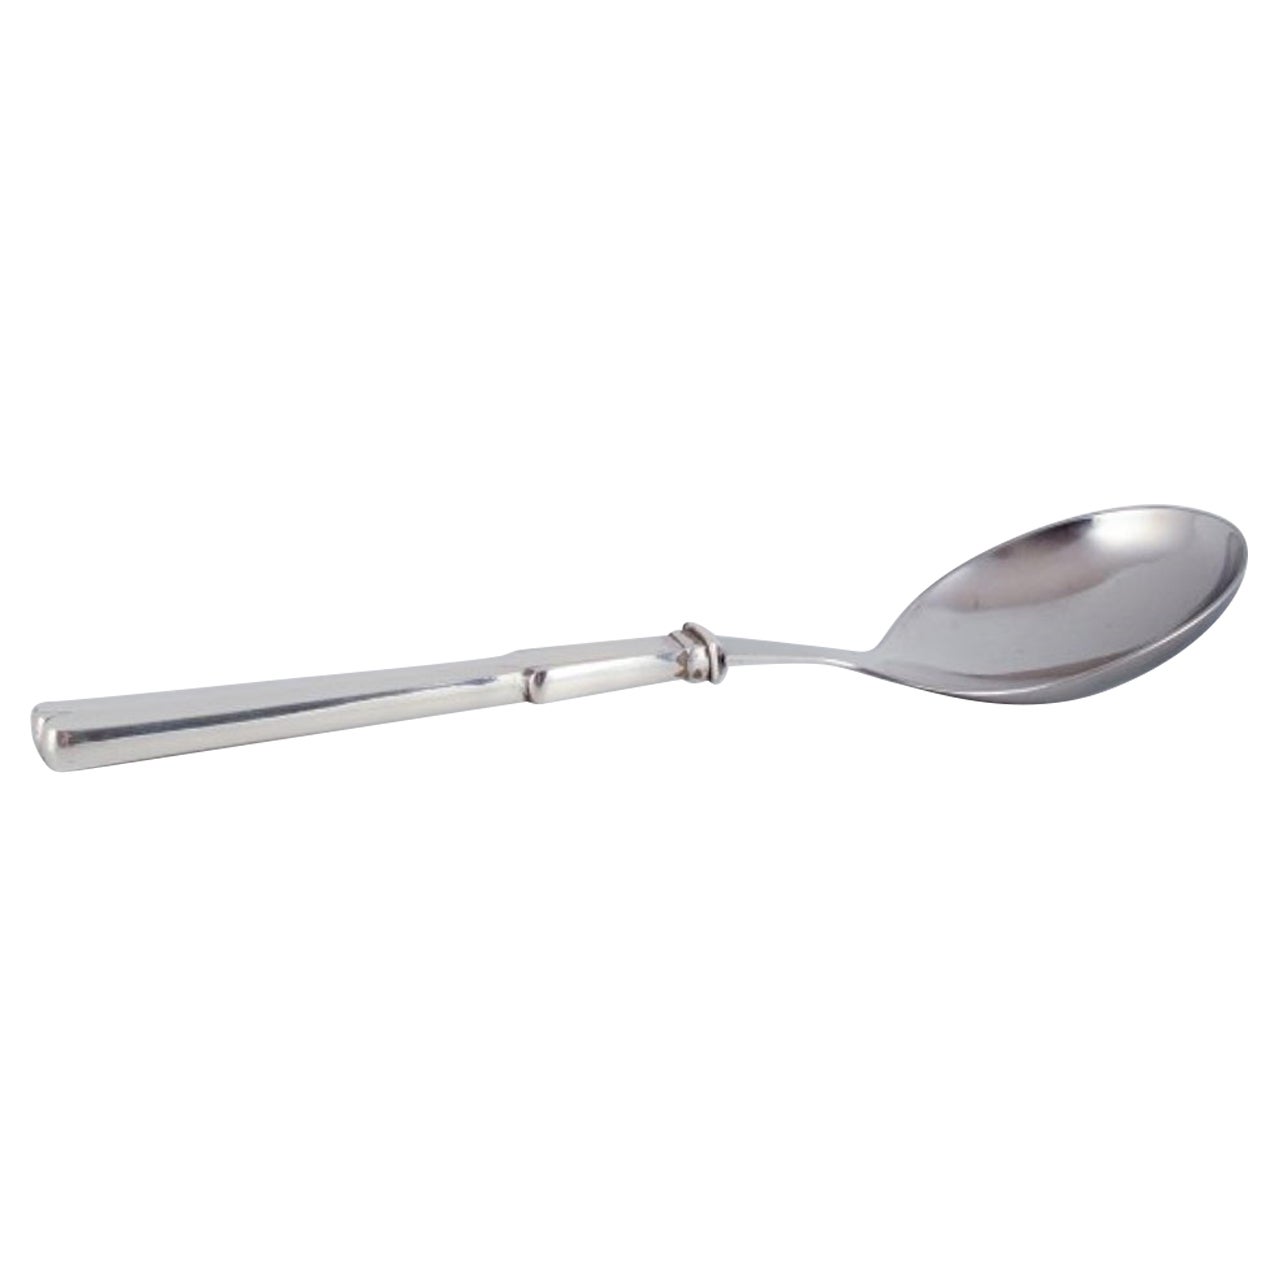 Hans Hansen. Art Deco serving spoon in sterling silver and stainless steel. For Sale